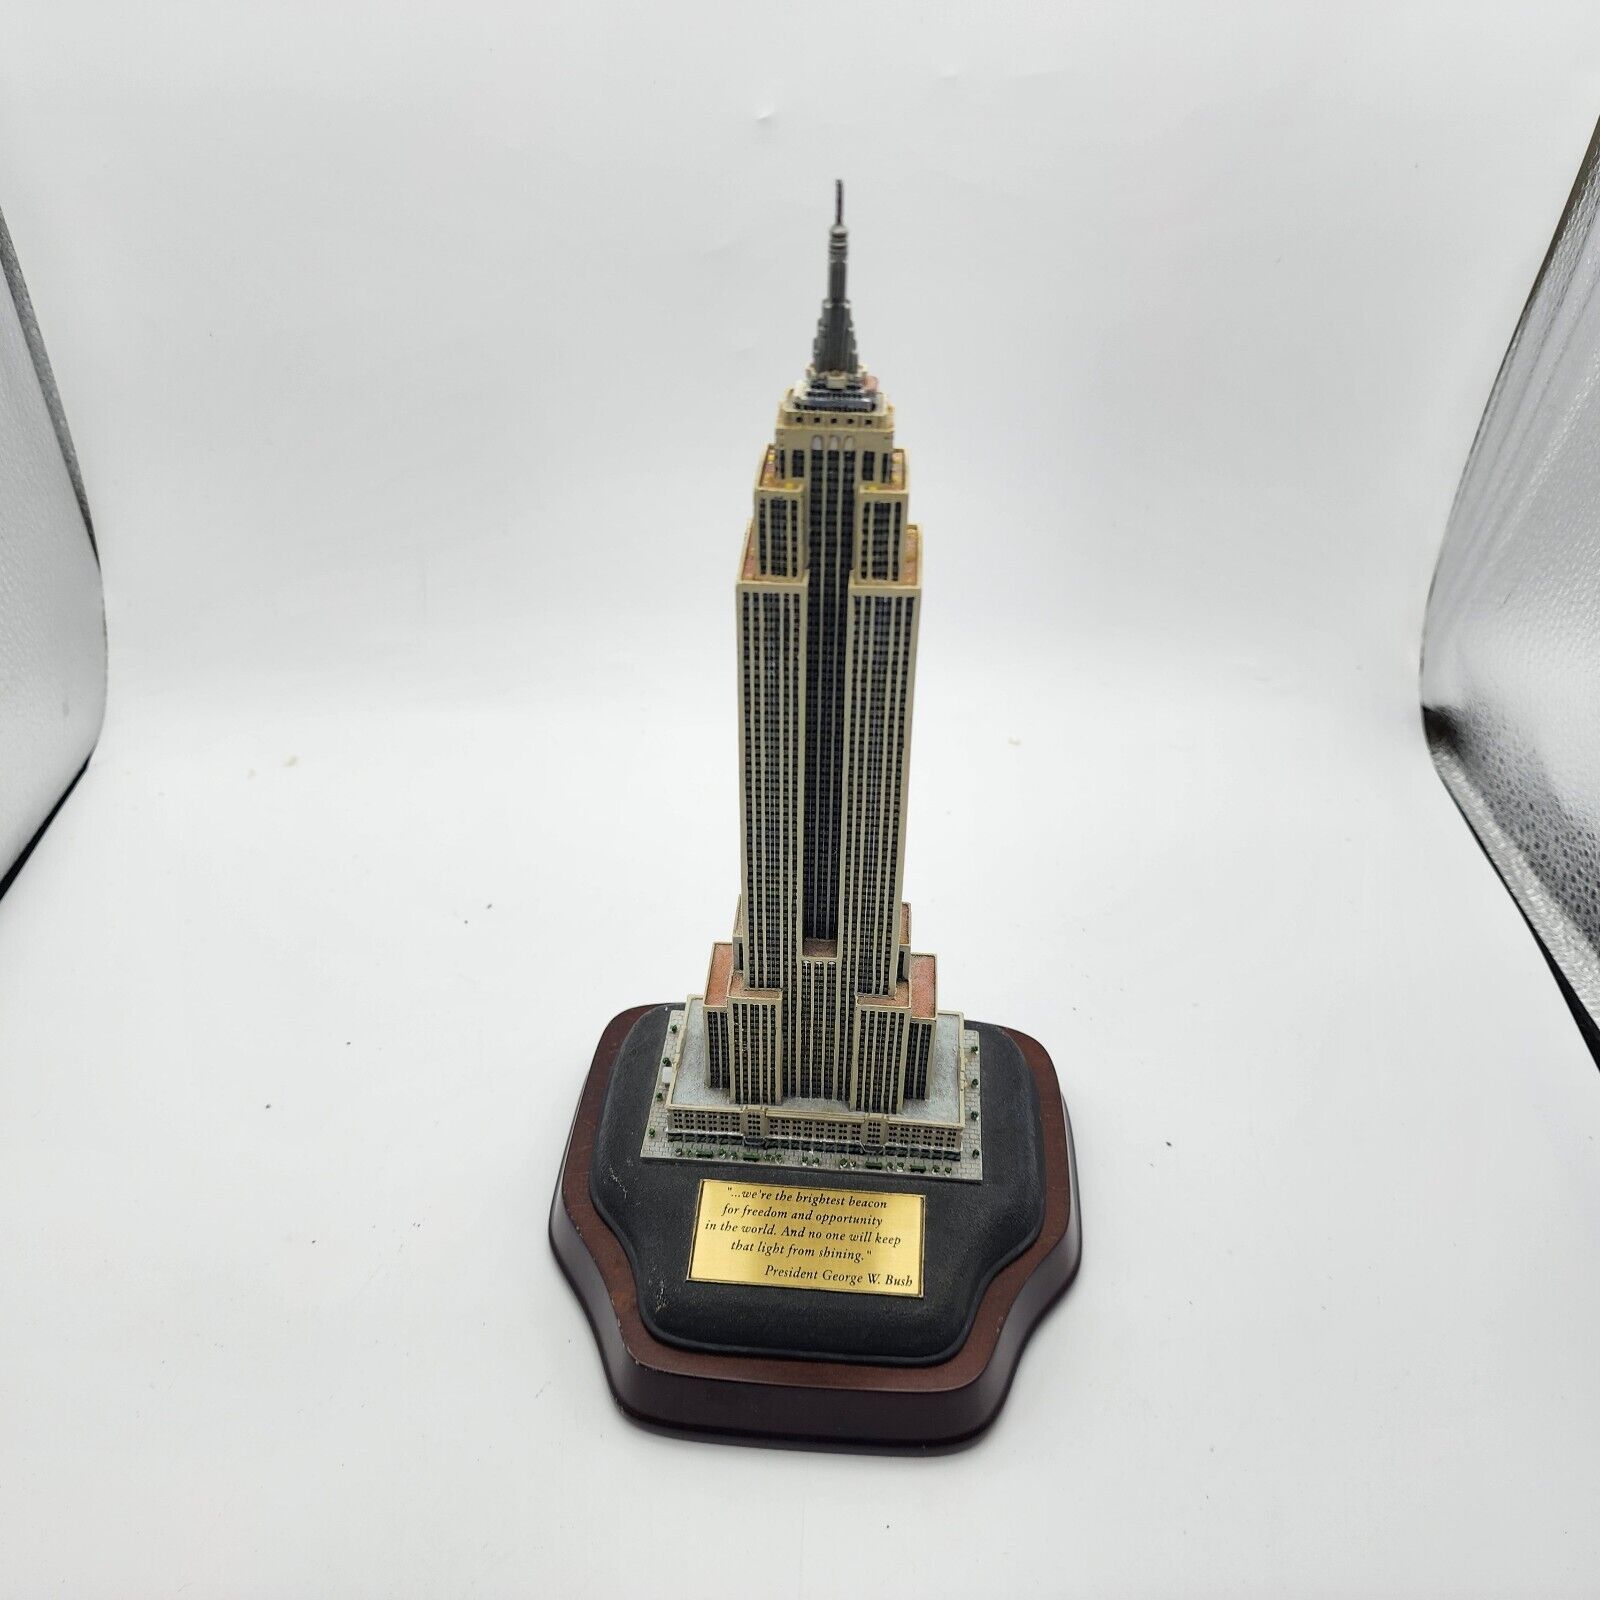 Danbury Mint Lighted Empire State Building, Lights Up - No AC Adaptor